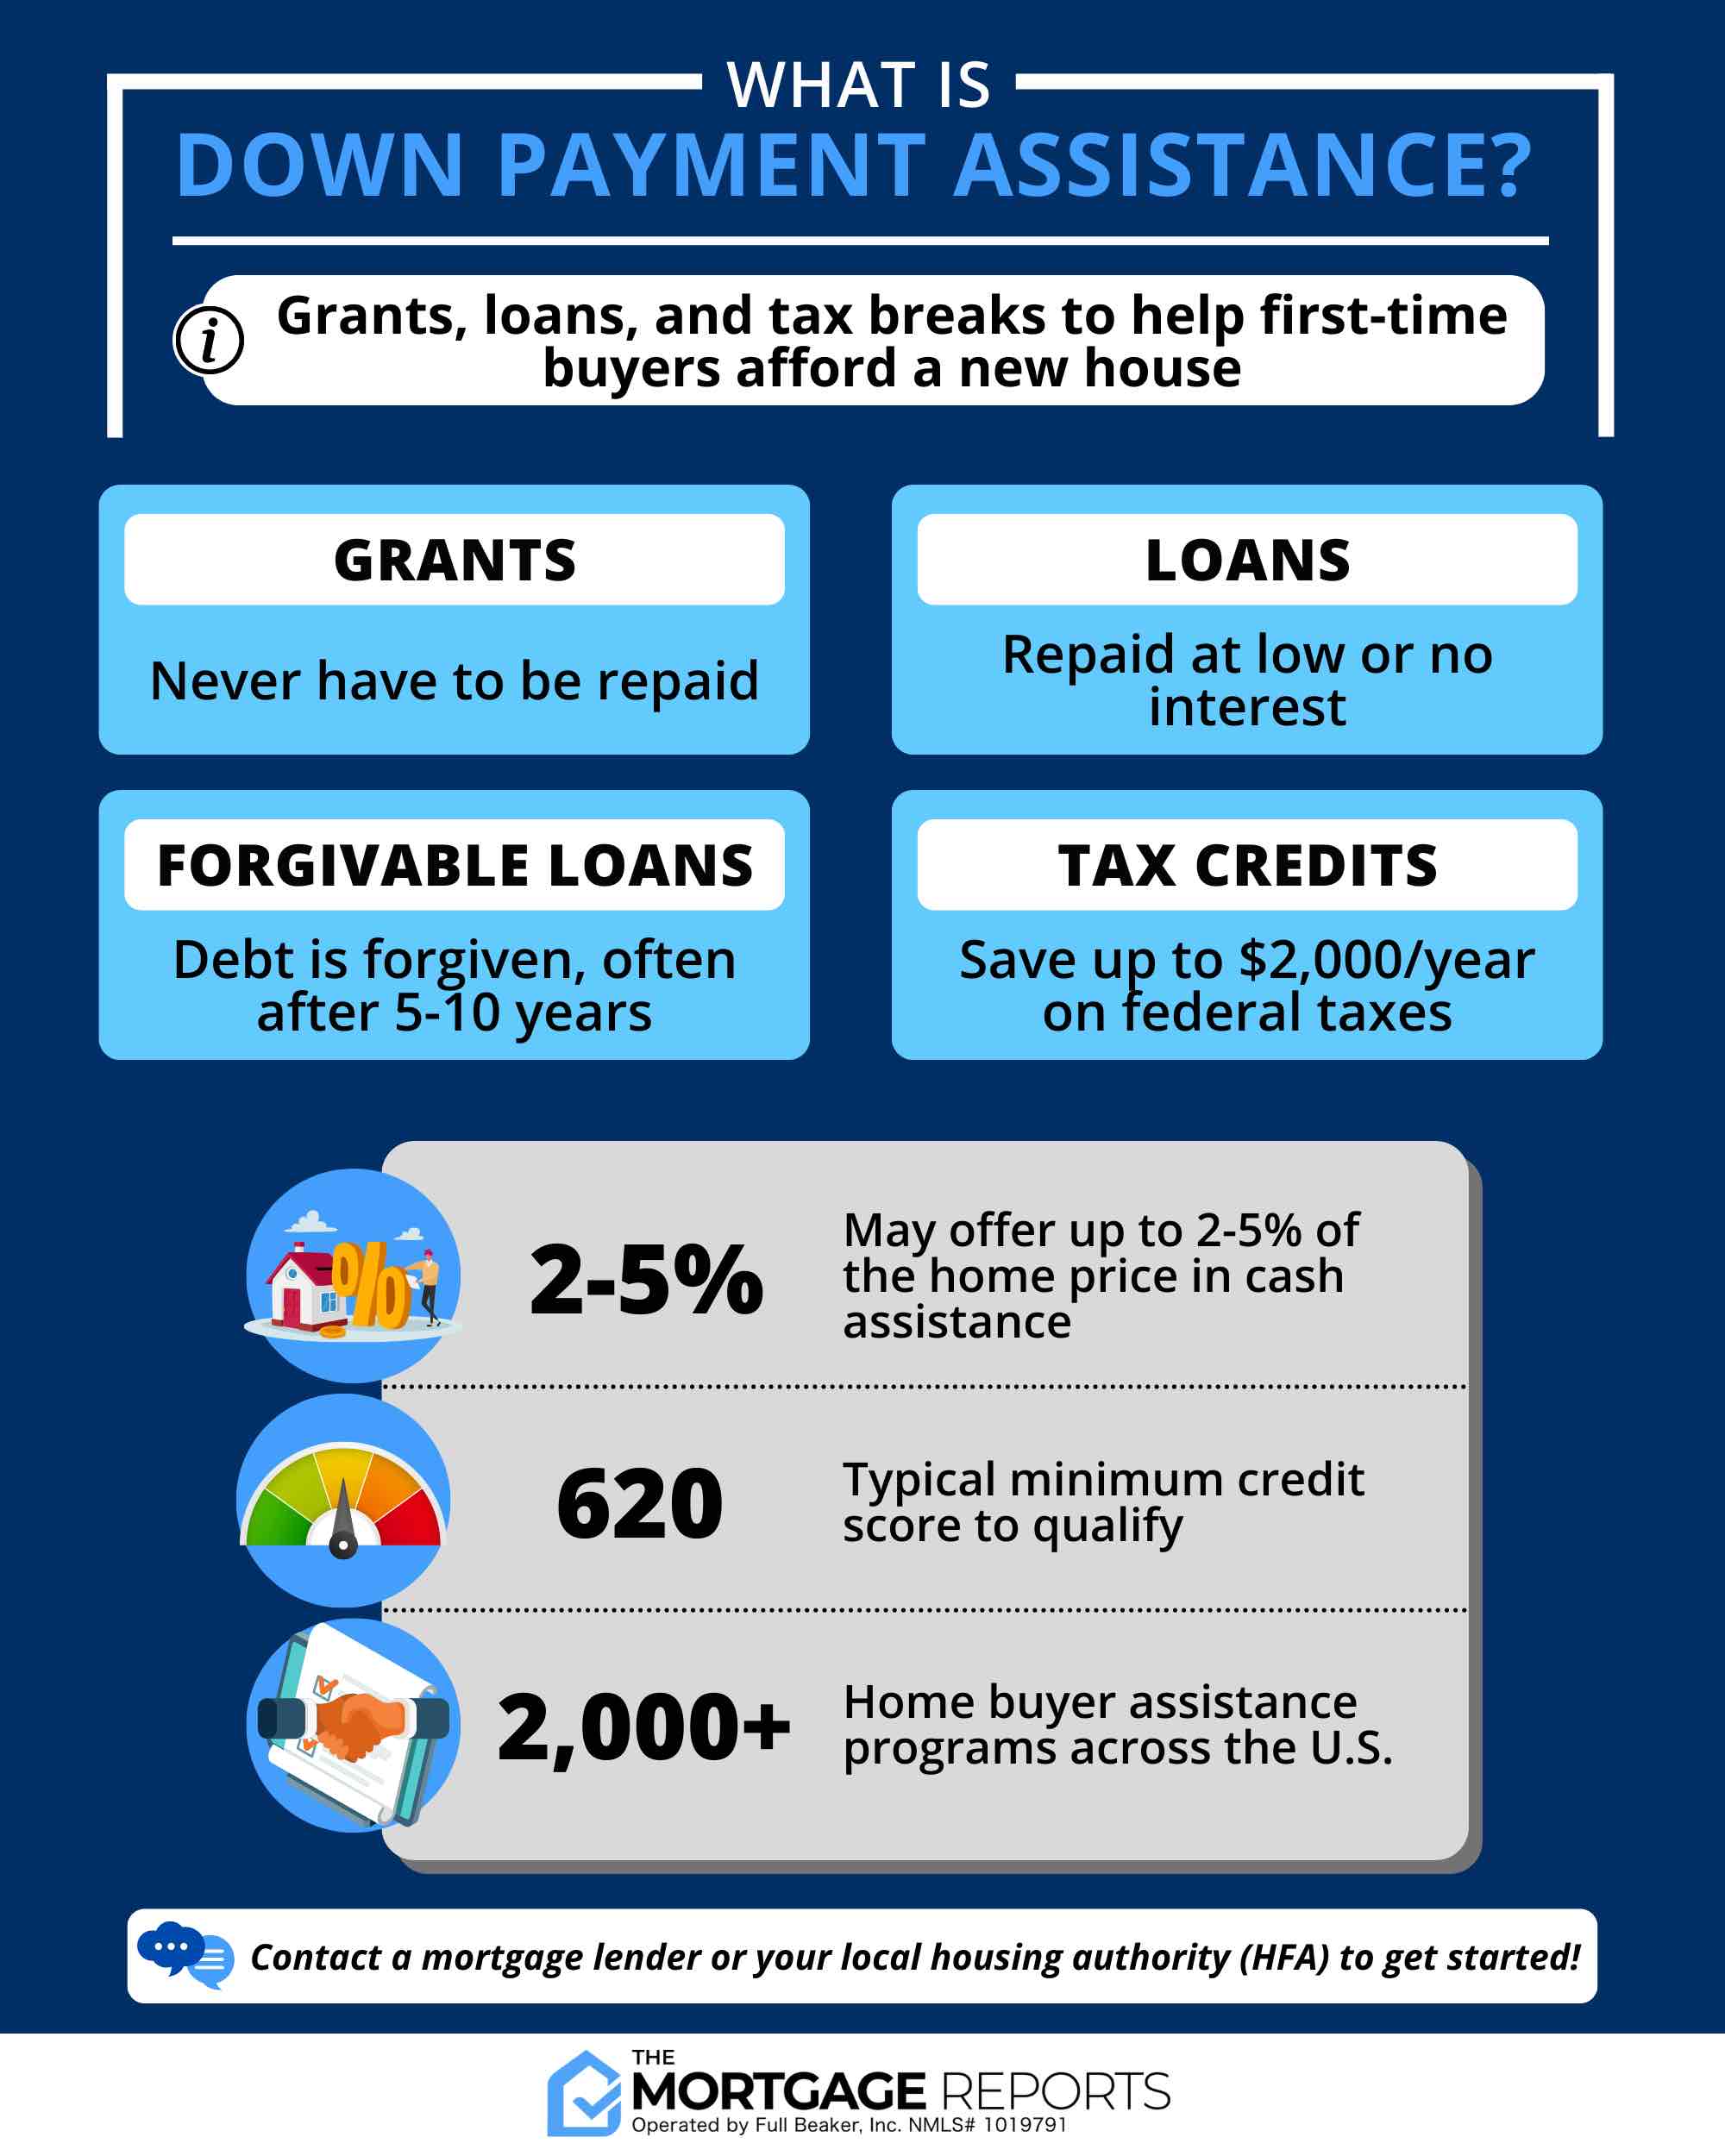 Infographic showing various down payment assistance programs including grants, loans, and tax credits. DPA programs can help first-time home buyers with cash assistance